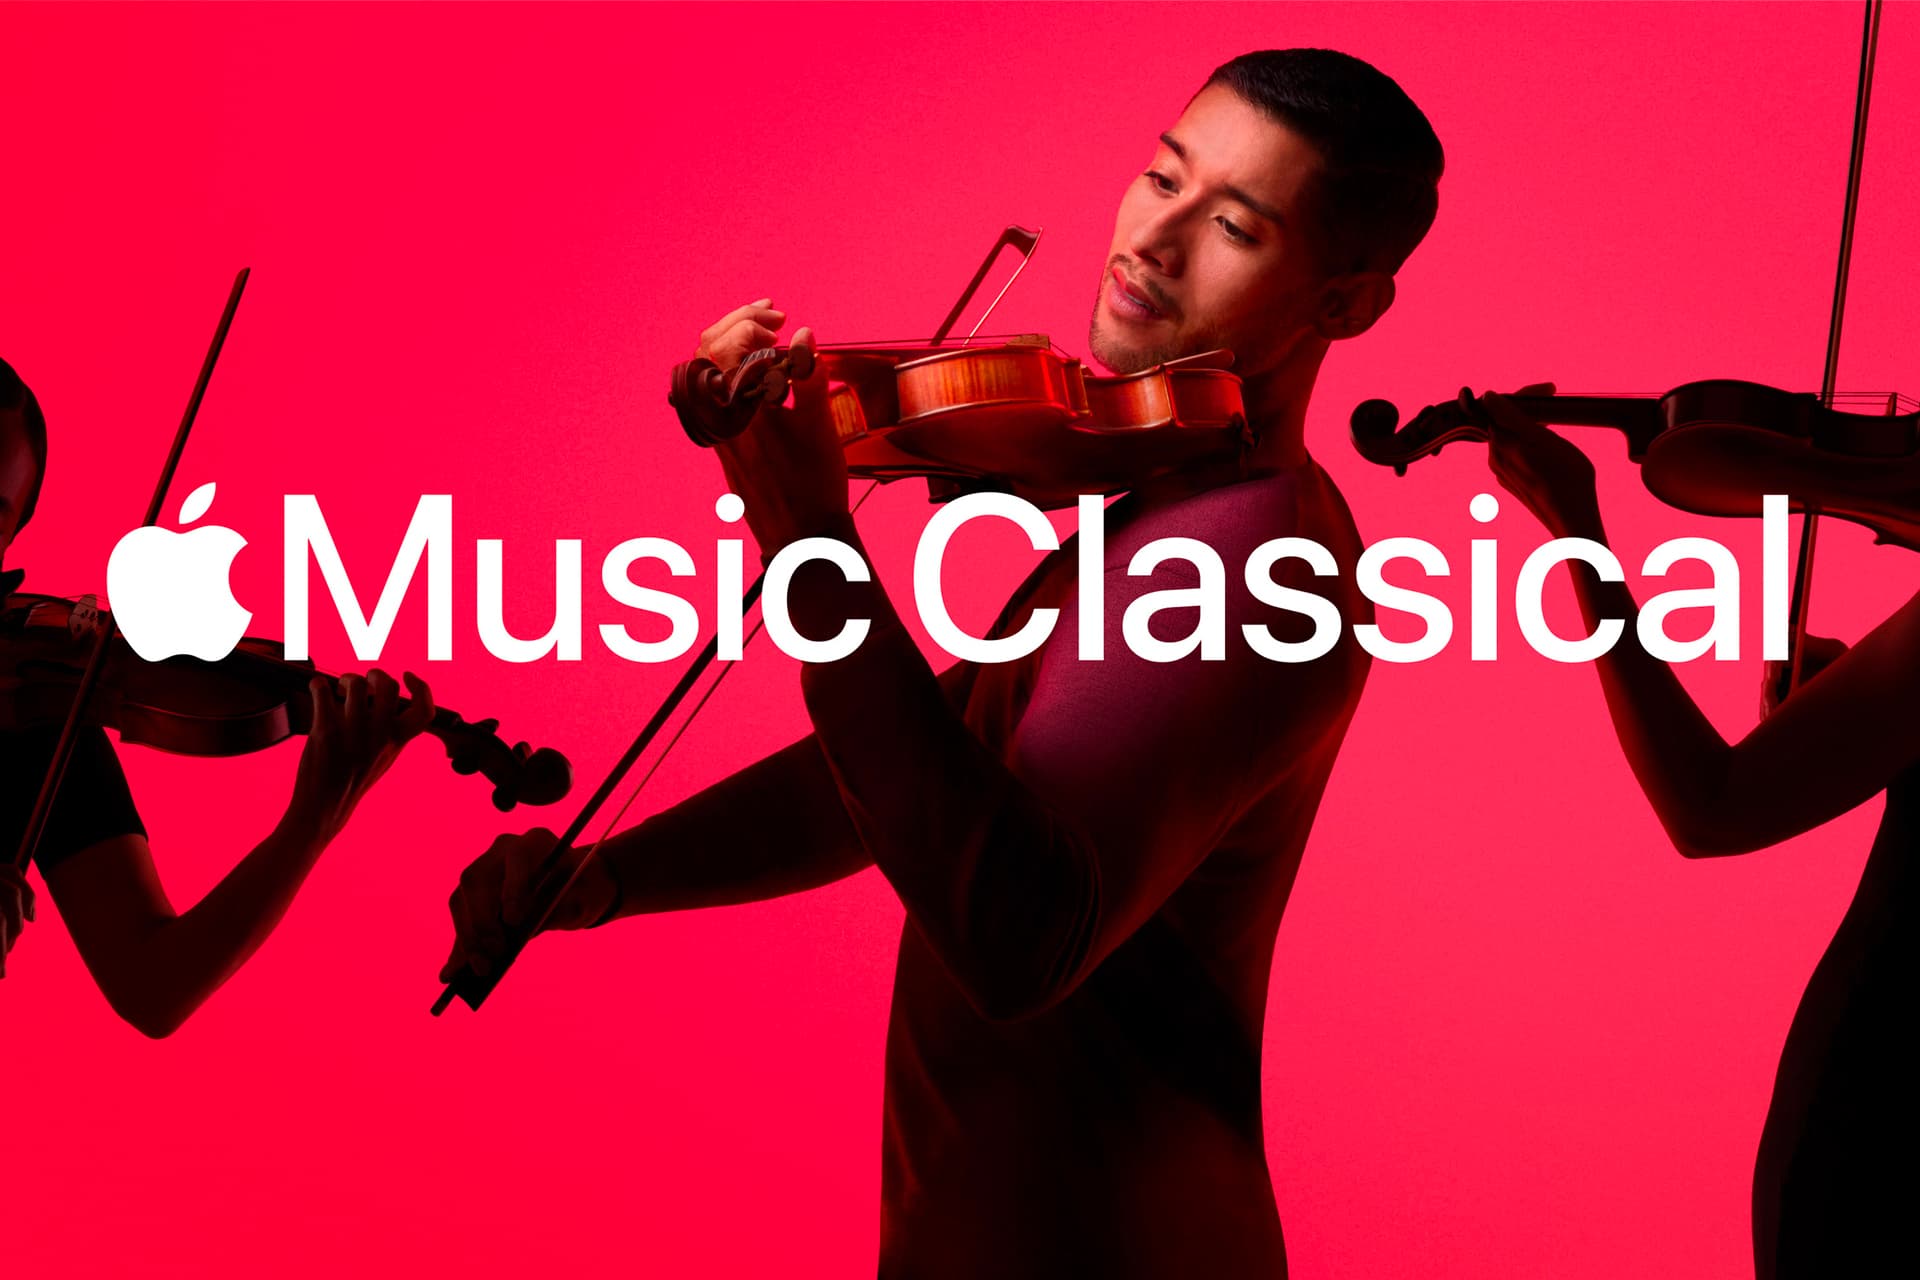 apple music classical official cover 64762e692f30d133dcf5ee48